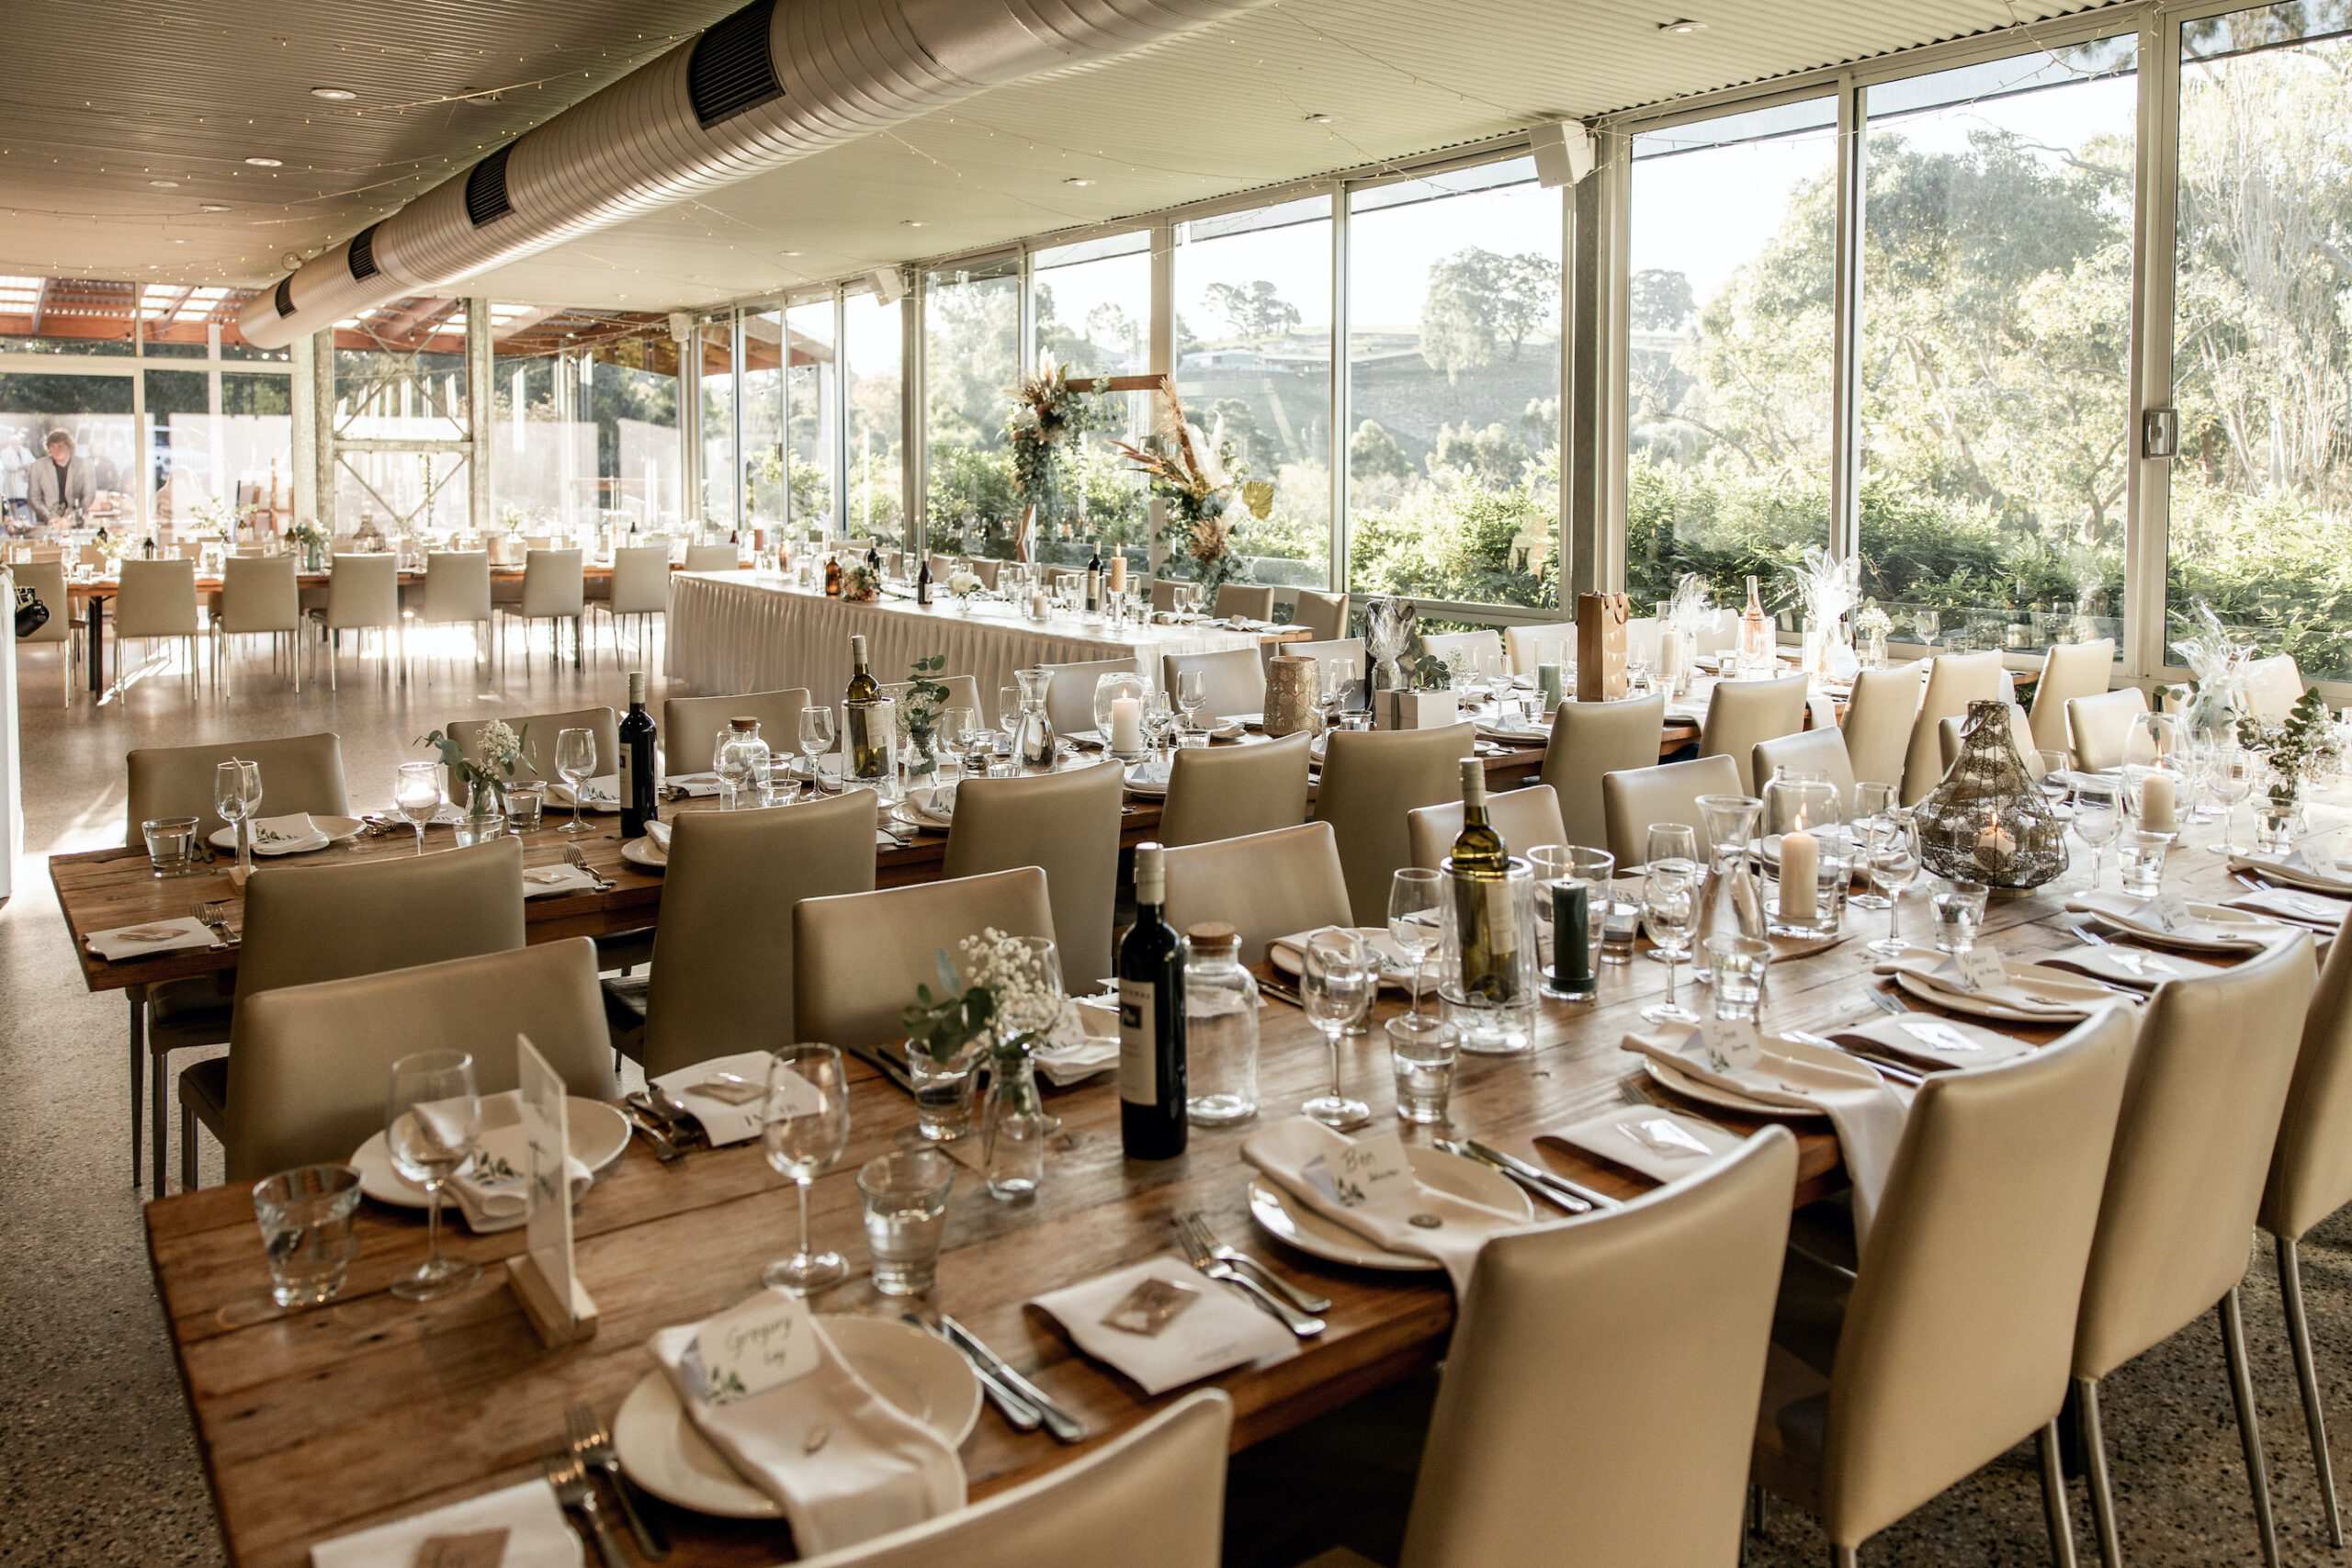 Inglewood Inn, Adelaide Hills Wedding Venue, modern space with rustic aspects but an elegant feel only a short drive from the Adelaide City.